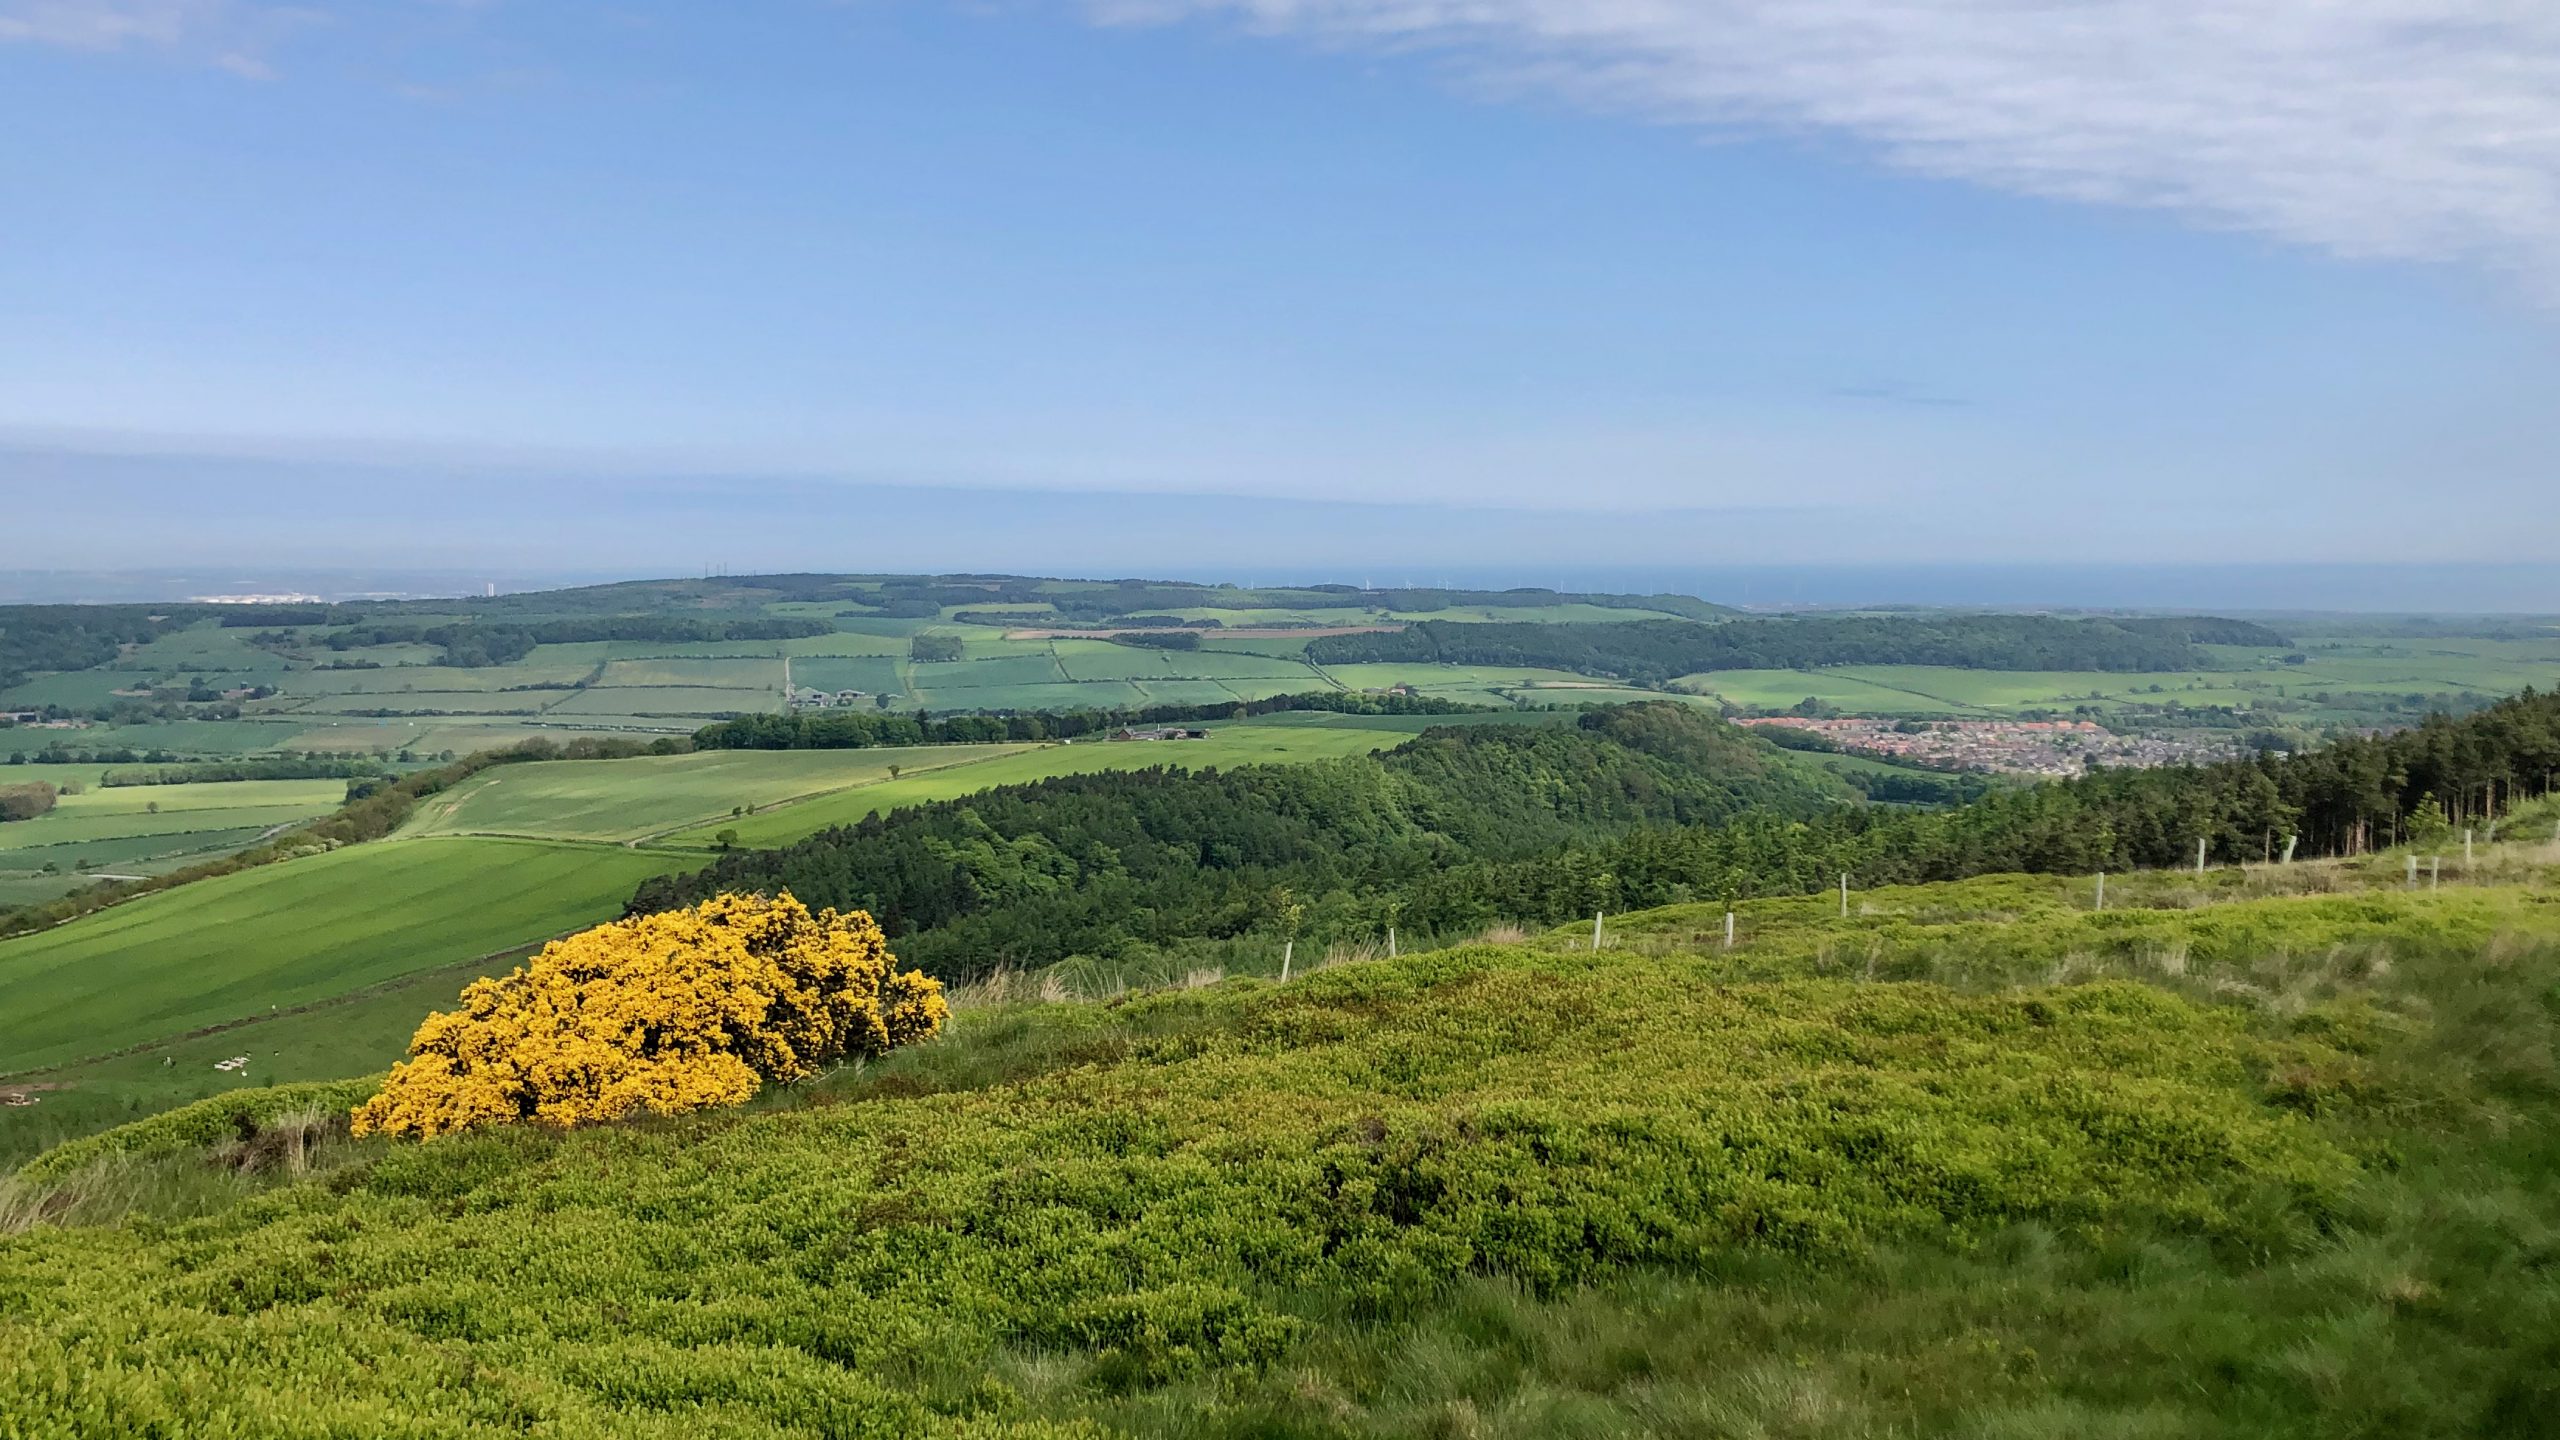 A pastoral view across a ridge with the town of Guisborough on the right and the North Sea in the distance. A gorse bush provides a yellow contrast in the foreground.